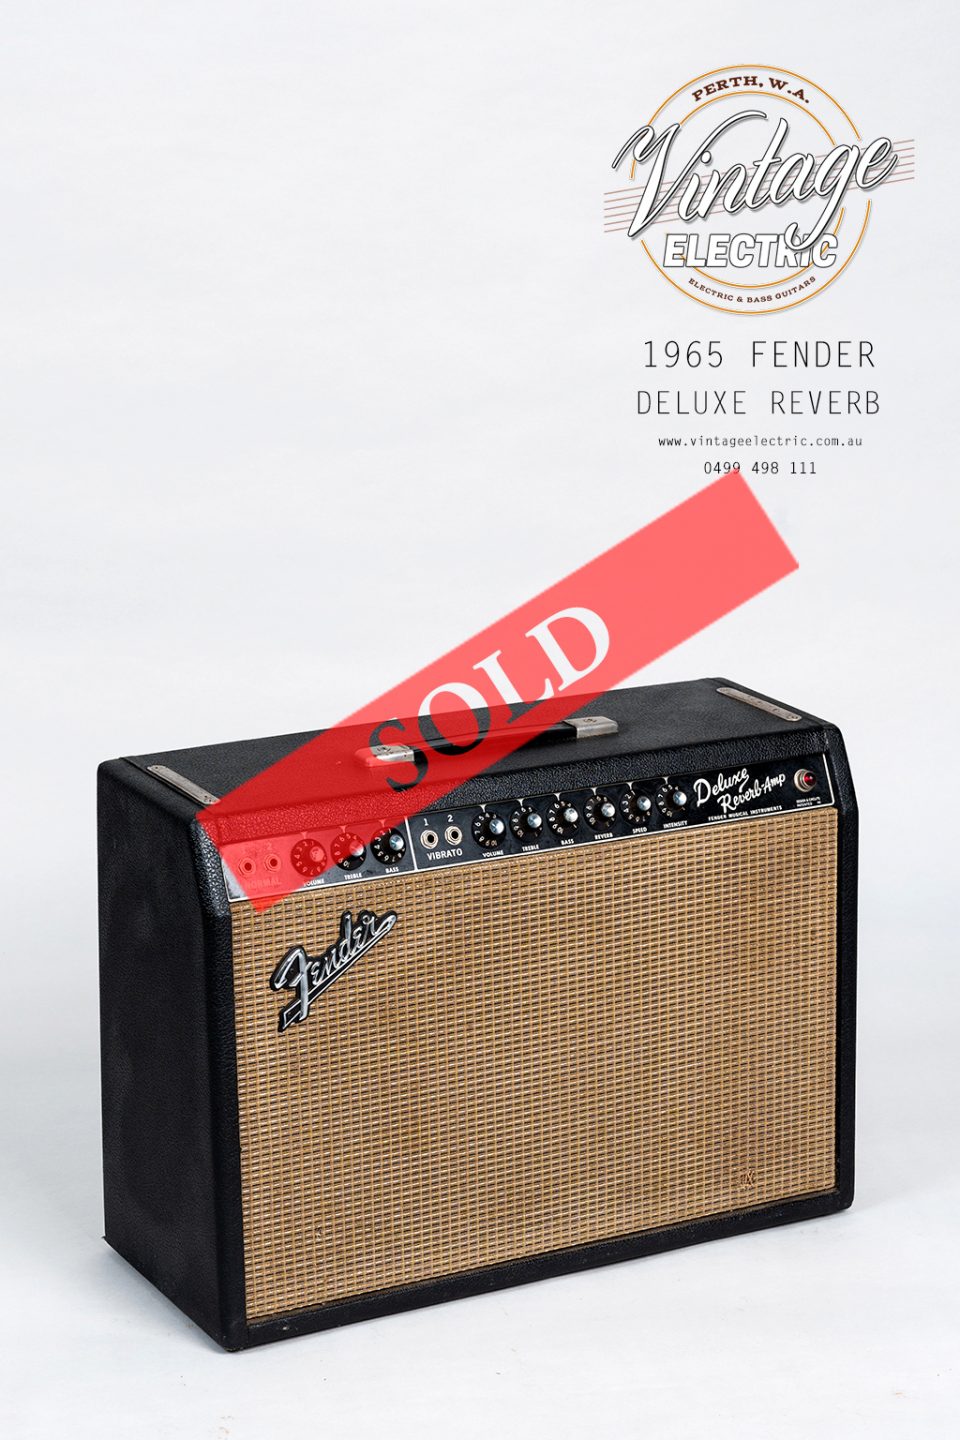 1965 Fender Deluxe Reverb LARGE SOLD